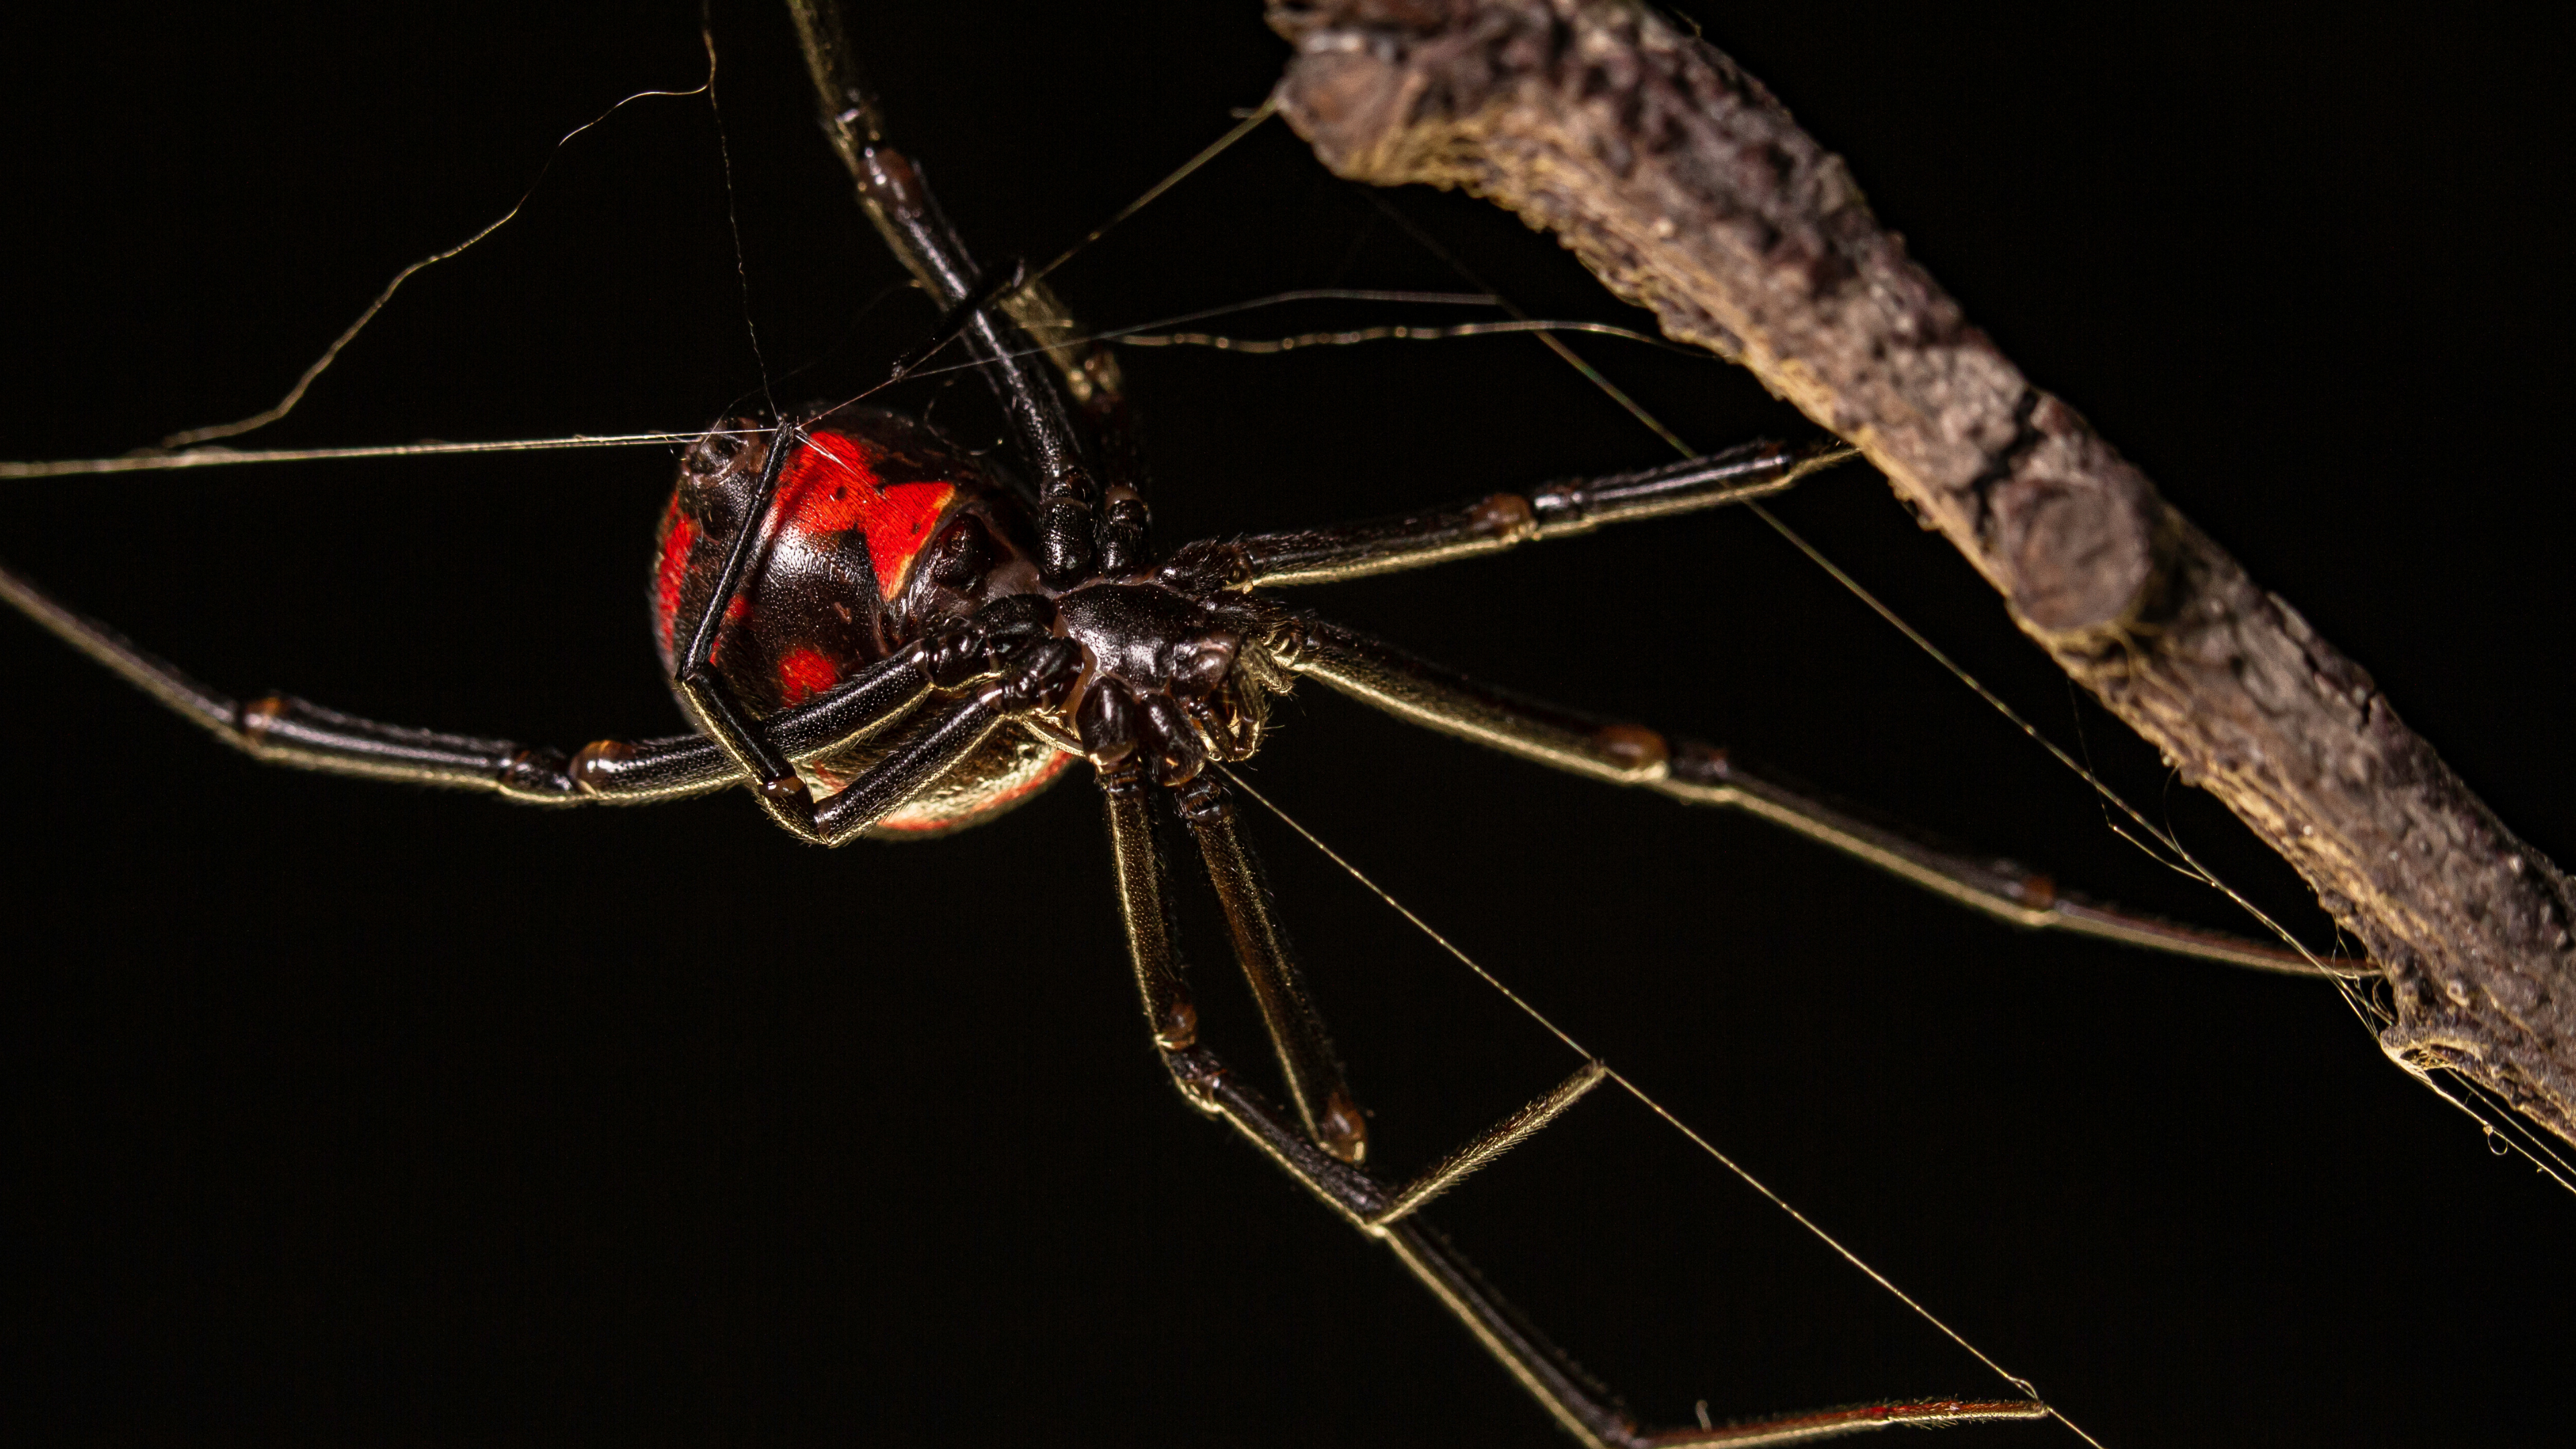 Up-close photo of a black spider with red markings on its thorax.